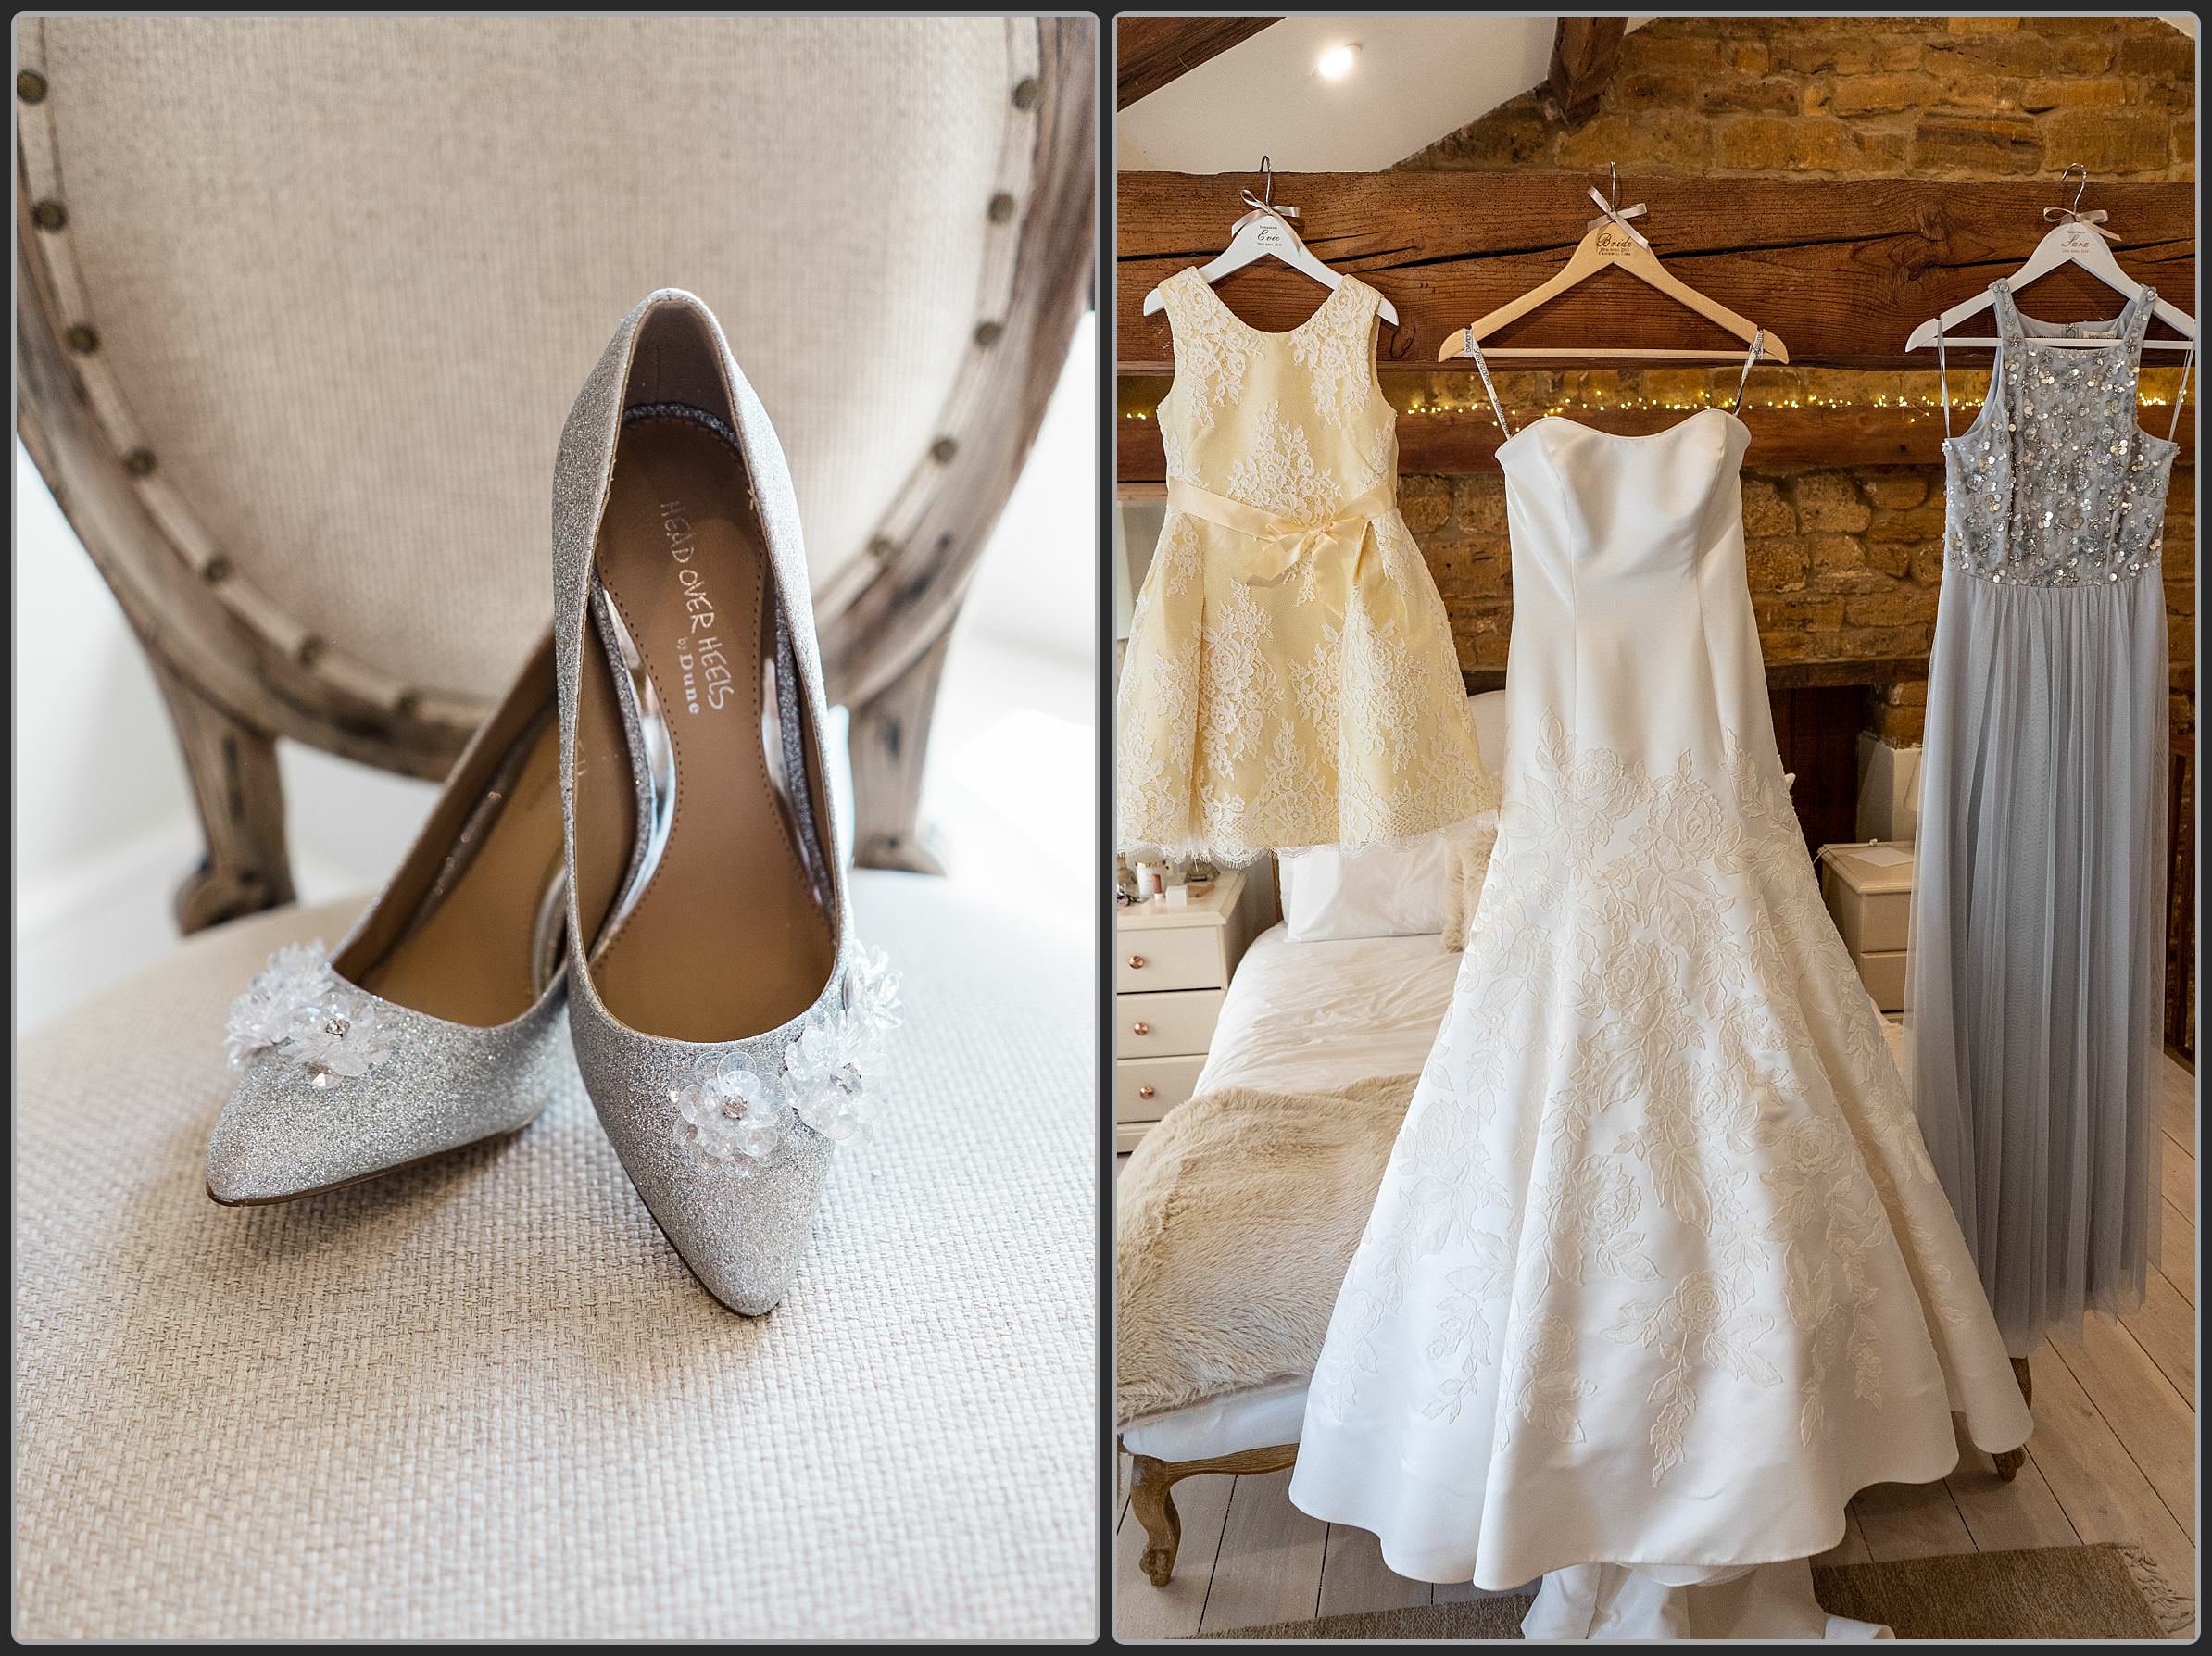 Wedding shoes and dresses